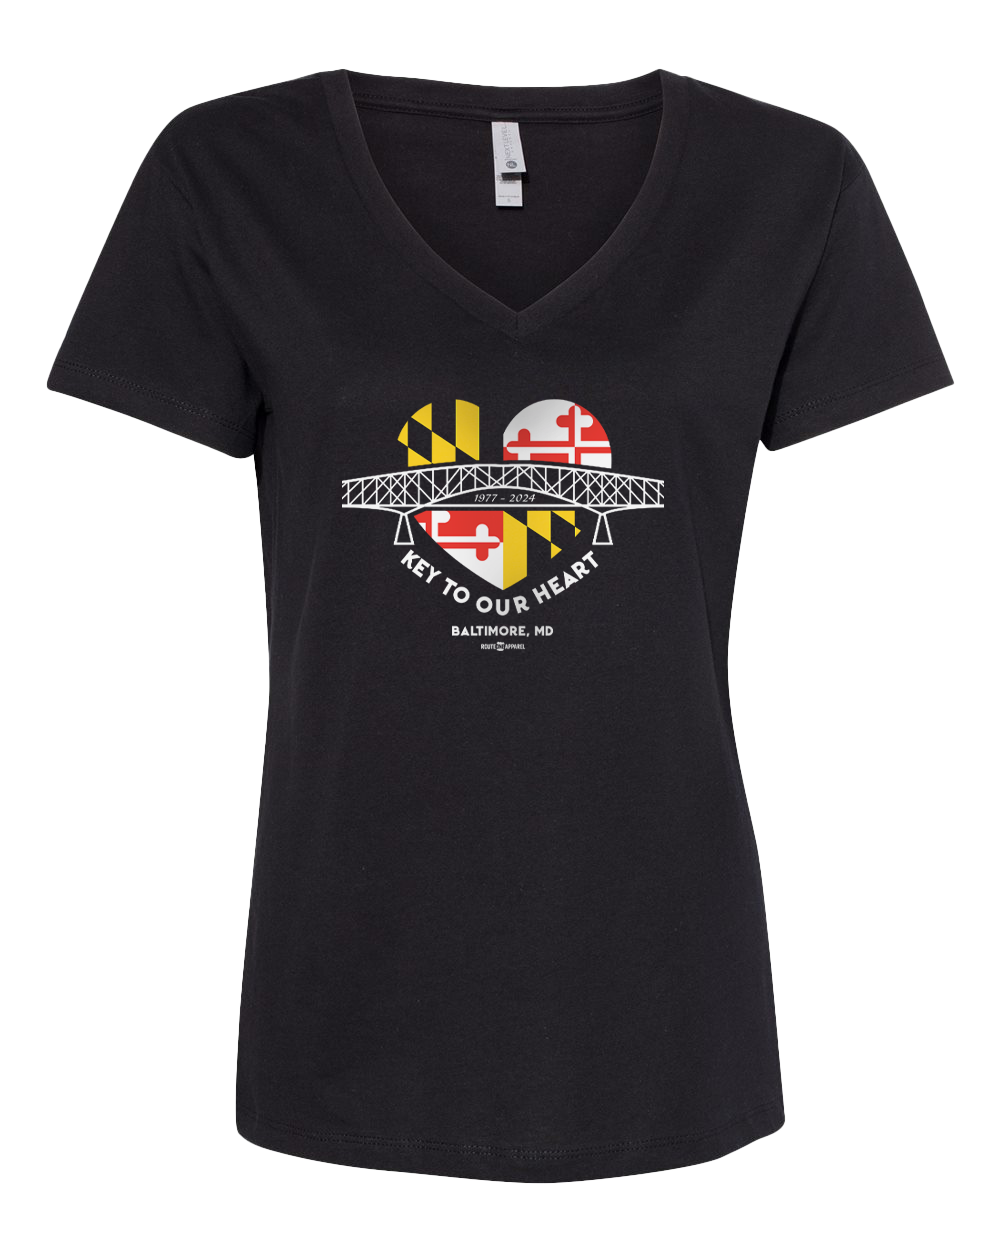 *PRE-ORDER* Key To Our Heart (Black) / Ladies V-Neck Shirt (Estimated Ship Date 4/29)